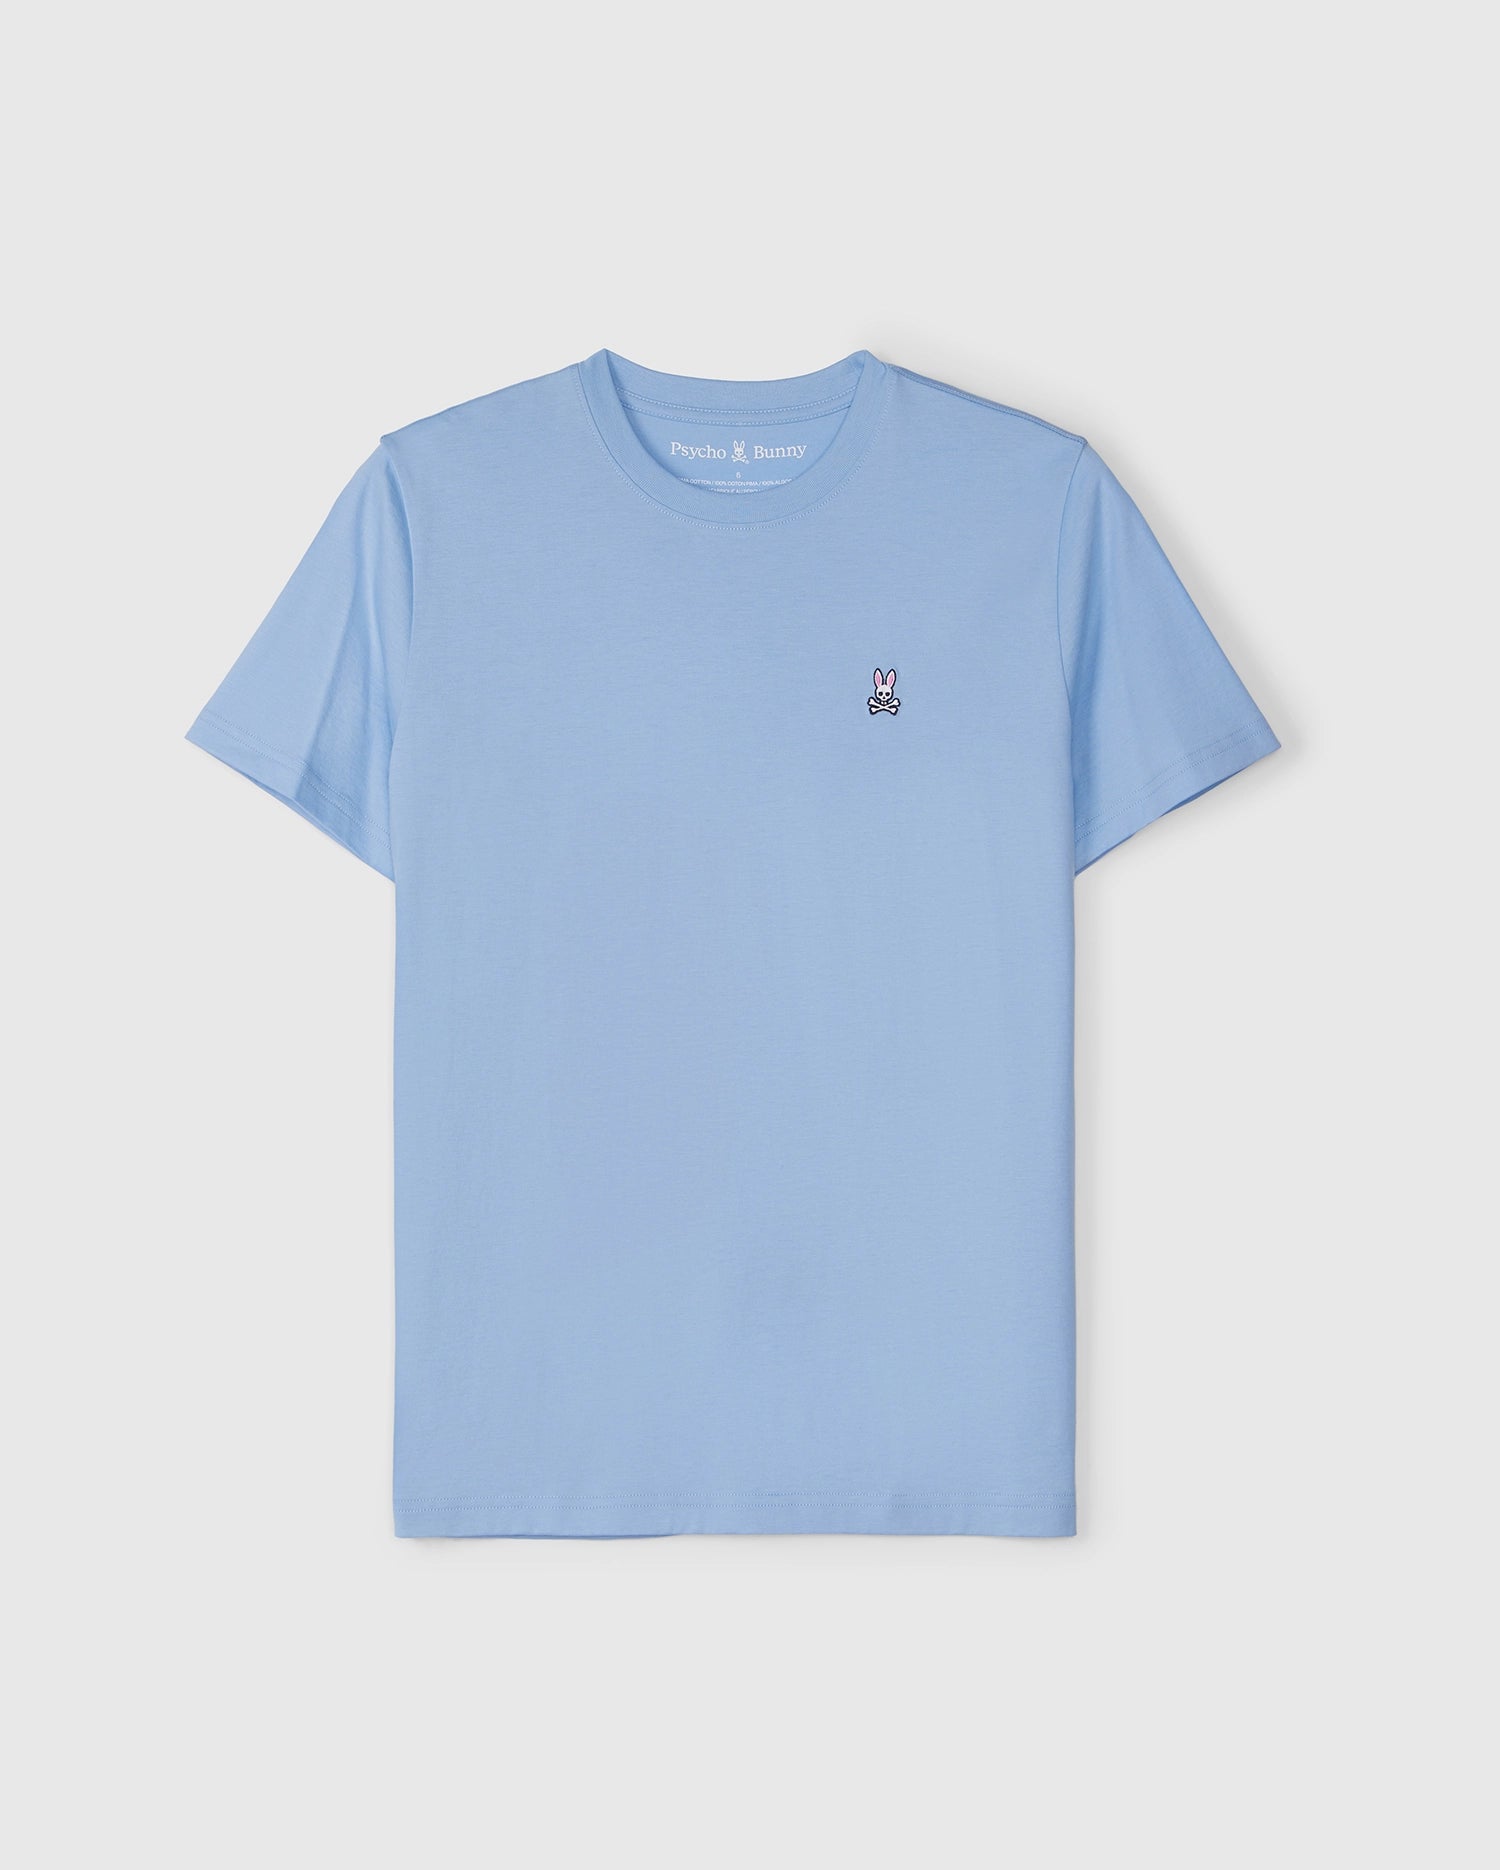 Pale blue crewneck tee with a small bunny graphic and 